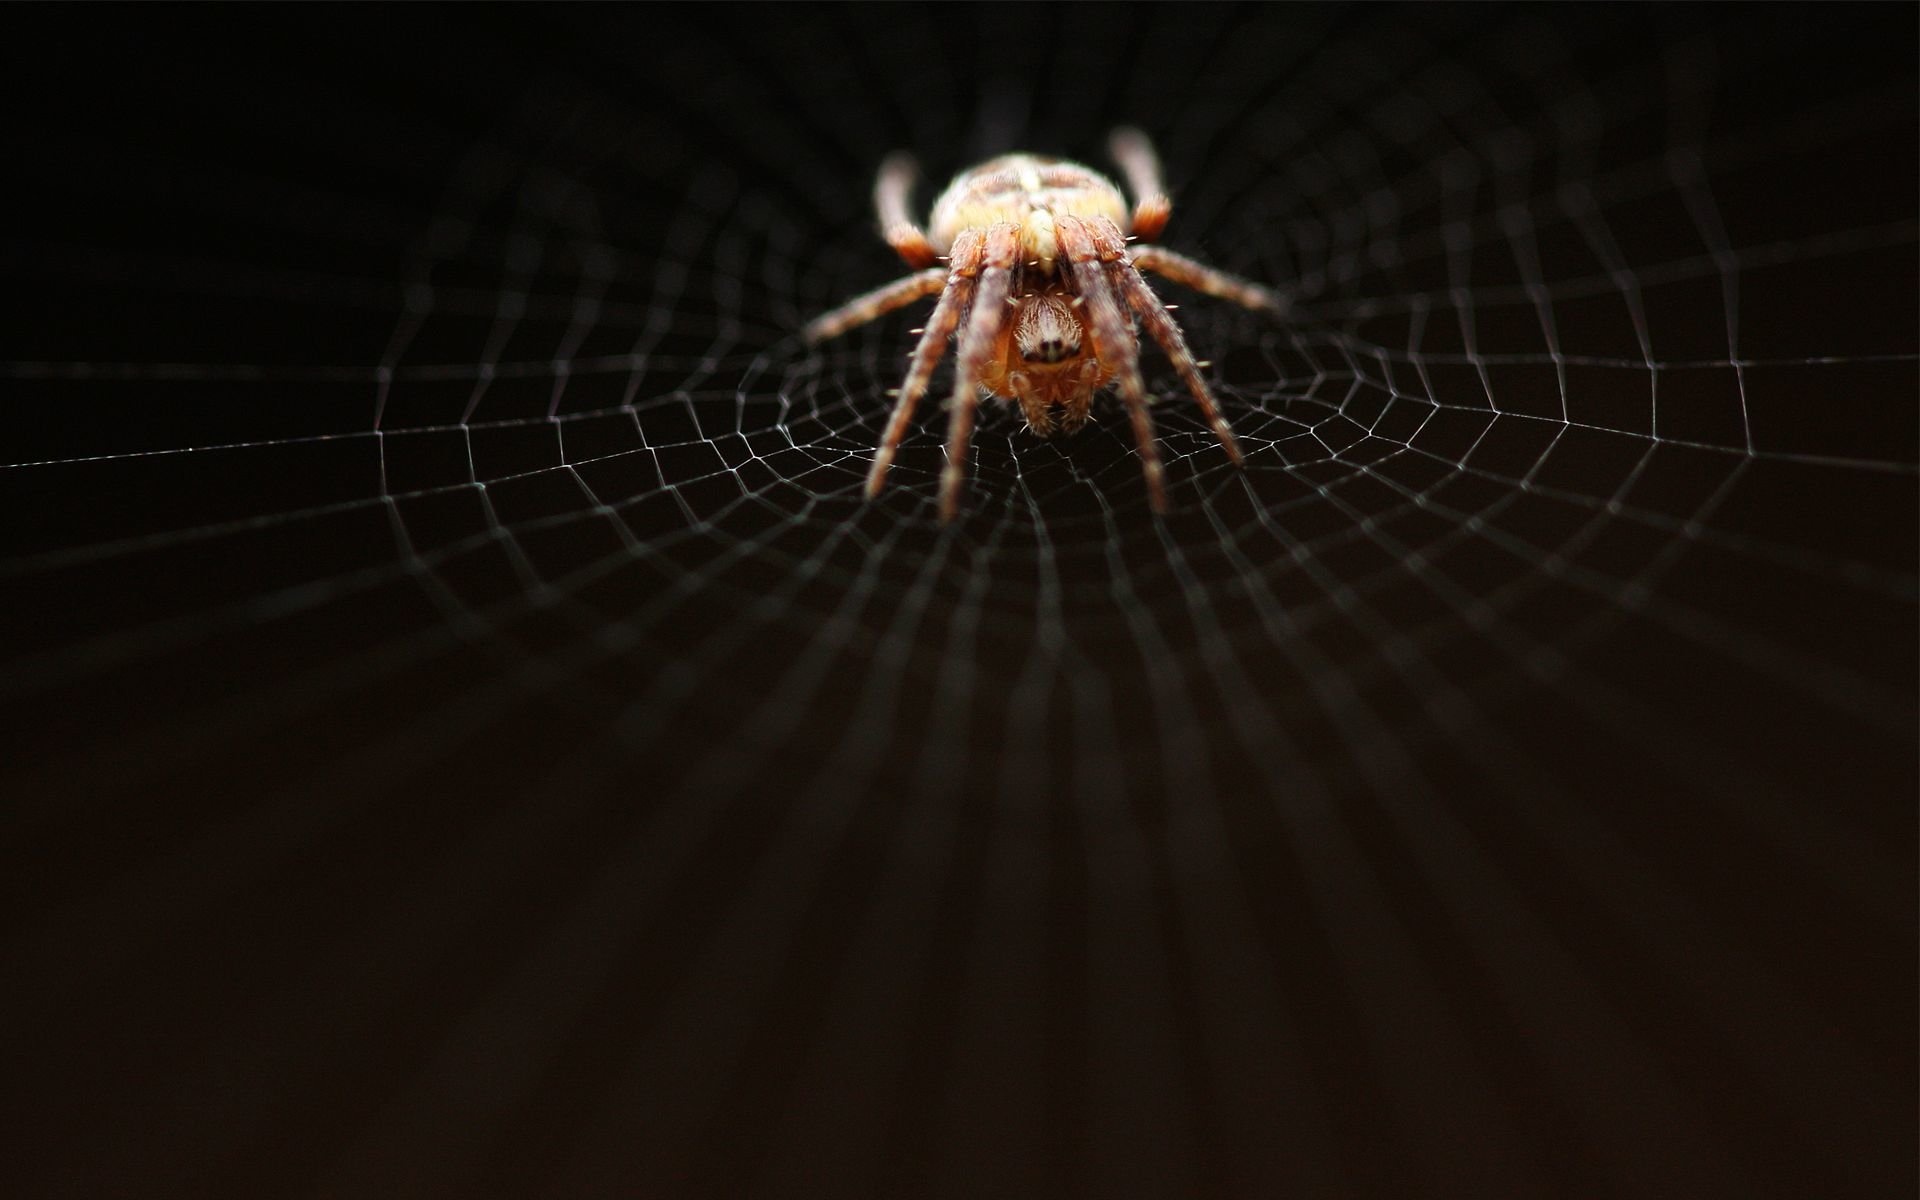 Spider wonders, Nature's intricate creatures, Captivating HD wallpapers, Animal fascination, 1920x1200 HD Desktop